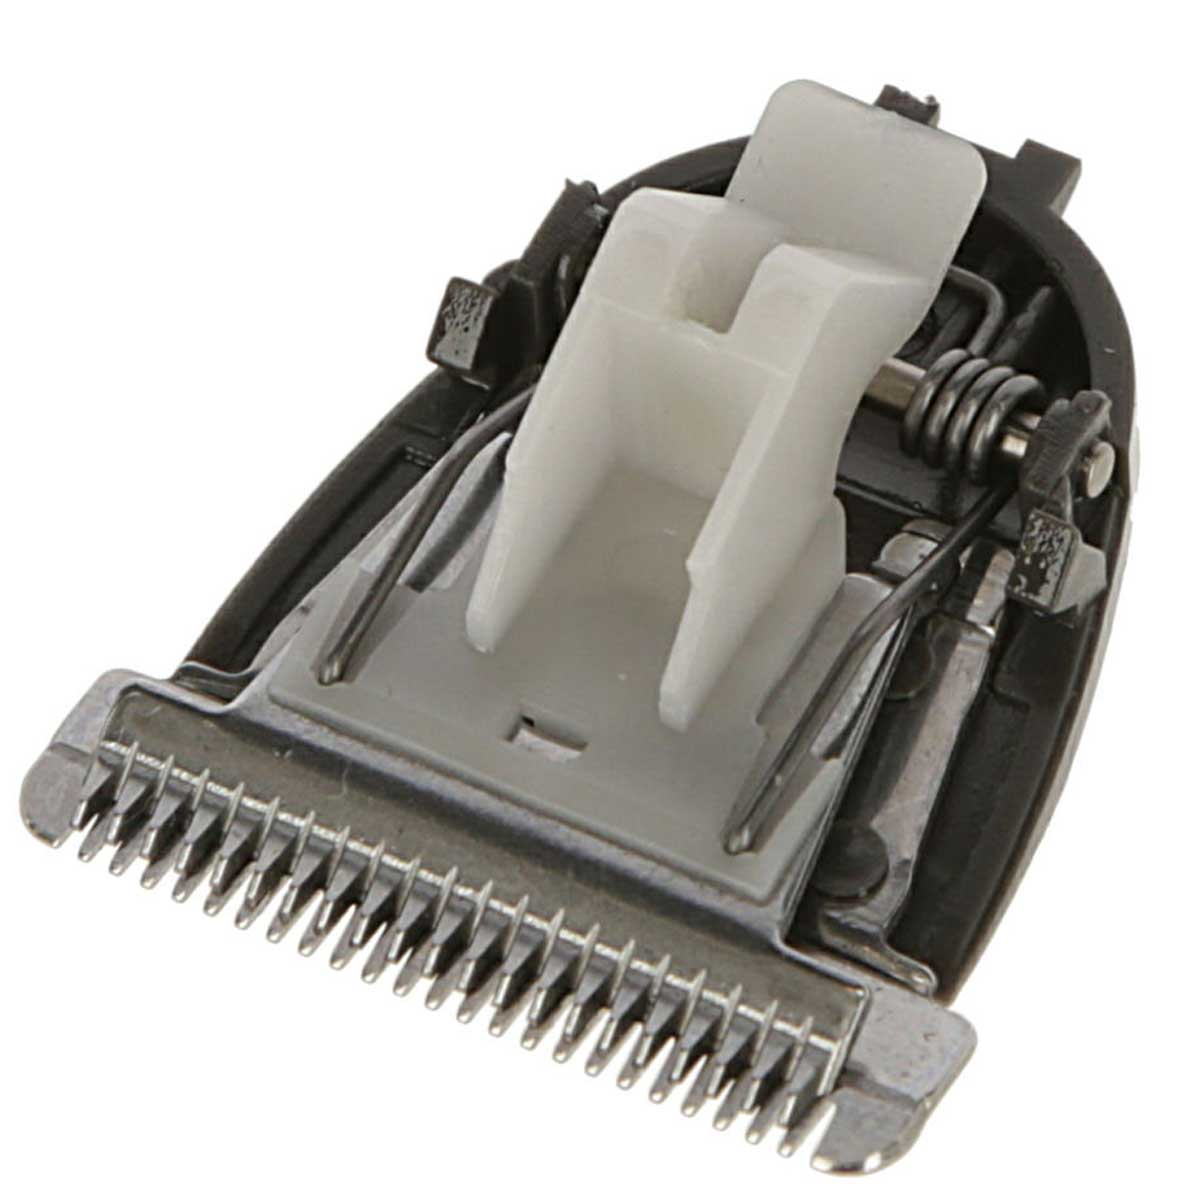 Clipster Clipper Blade for CuttoX